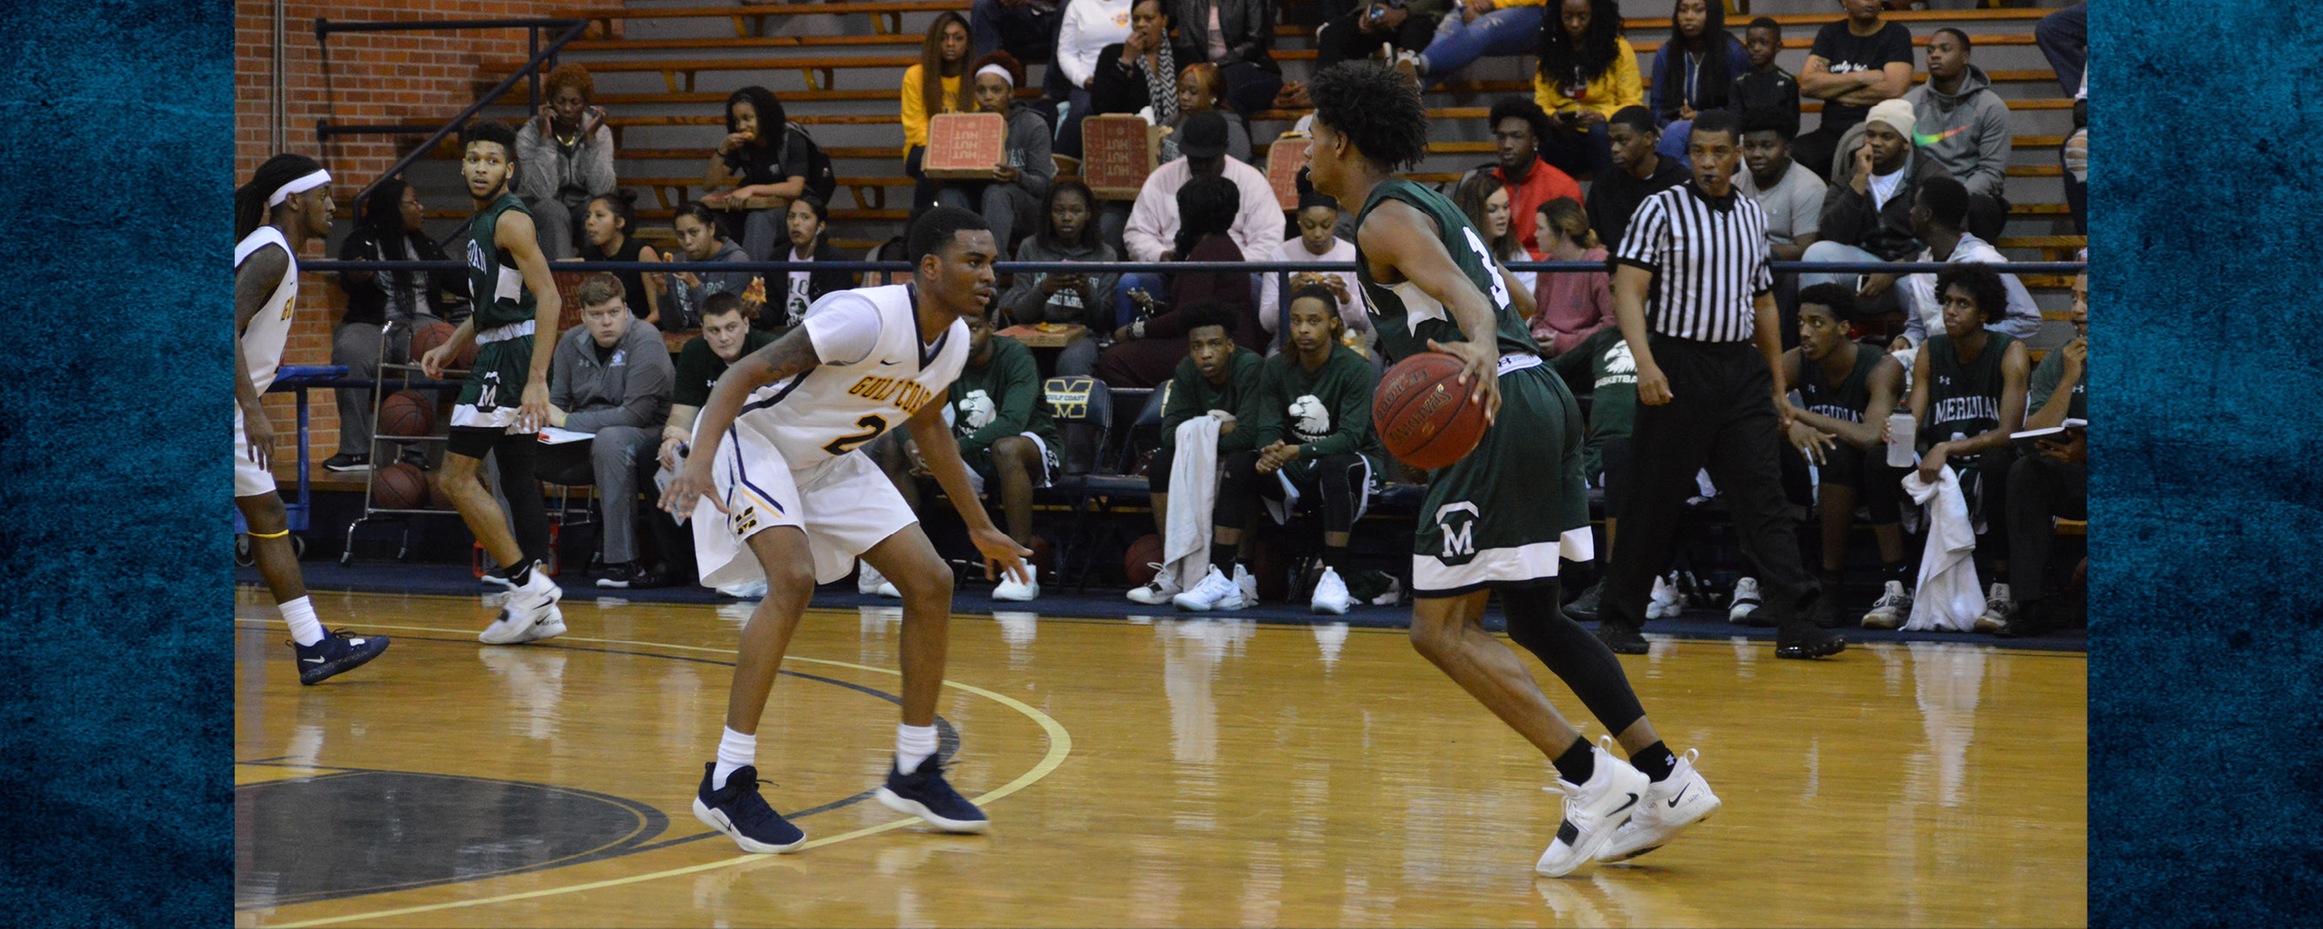 MGCCC faces No. 14 PRCC for 1st